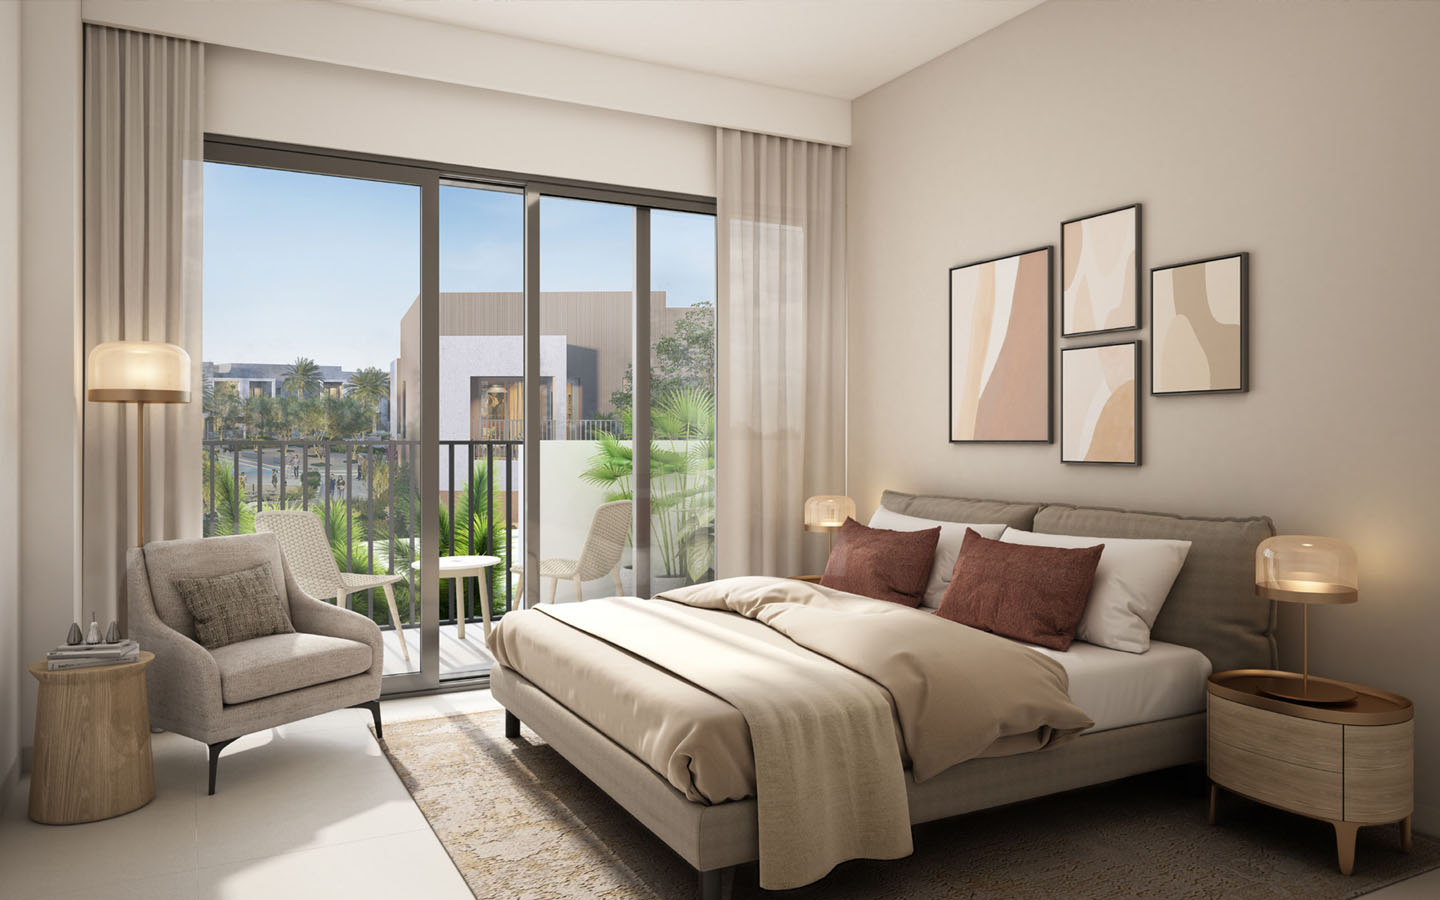 the project offers 3 and 4-bed villas for sale